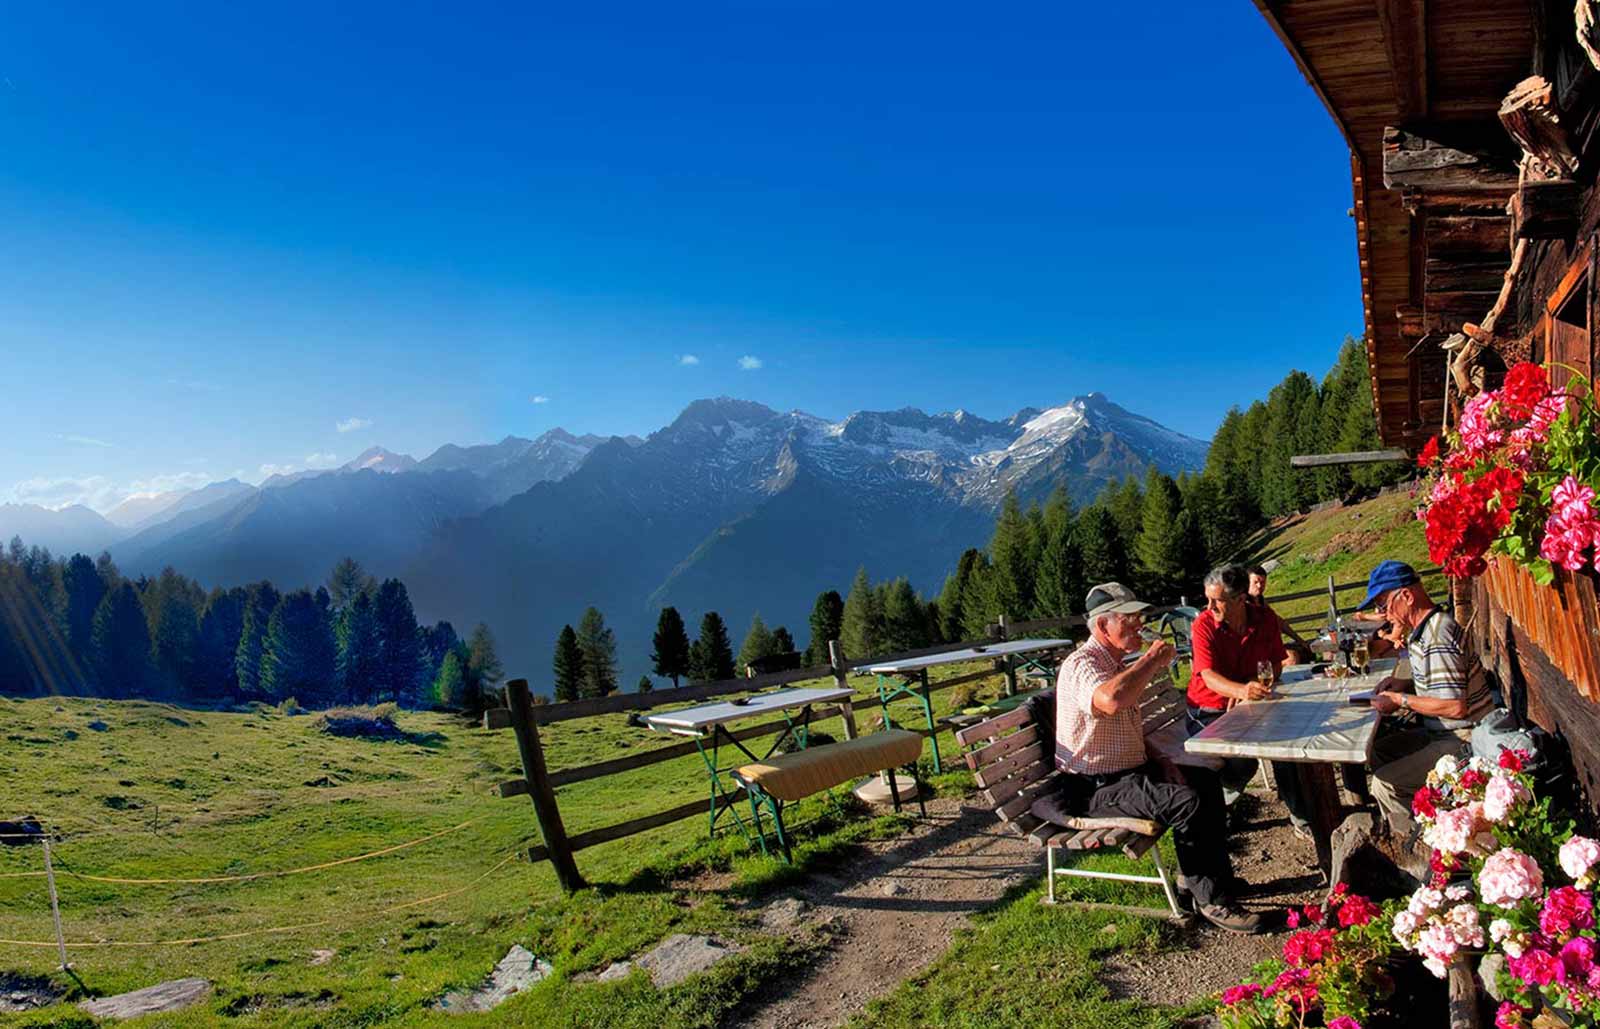 A hiking group is taking a break, drinking a beer in the Southtyrolean Dolomites